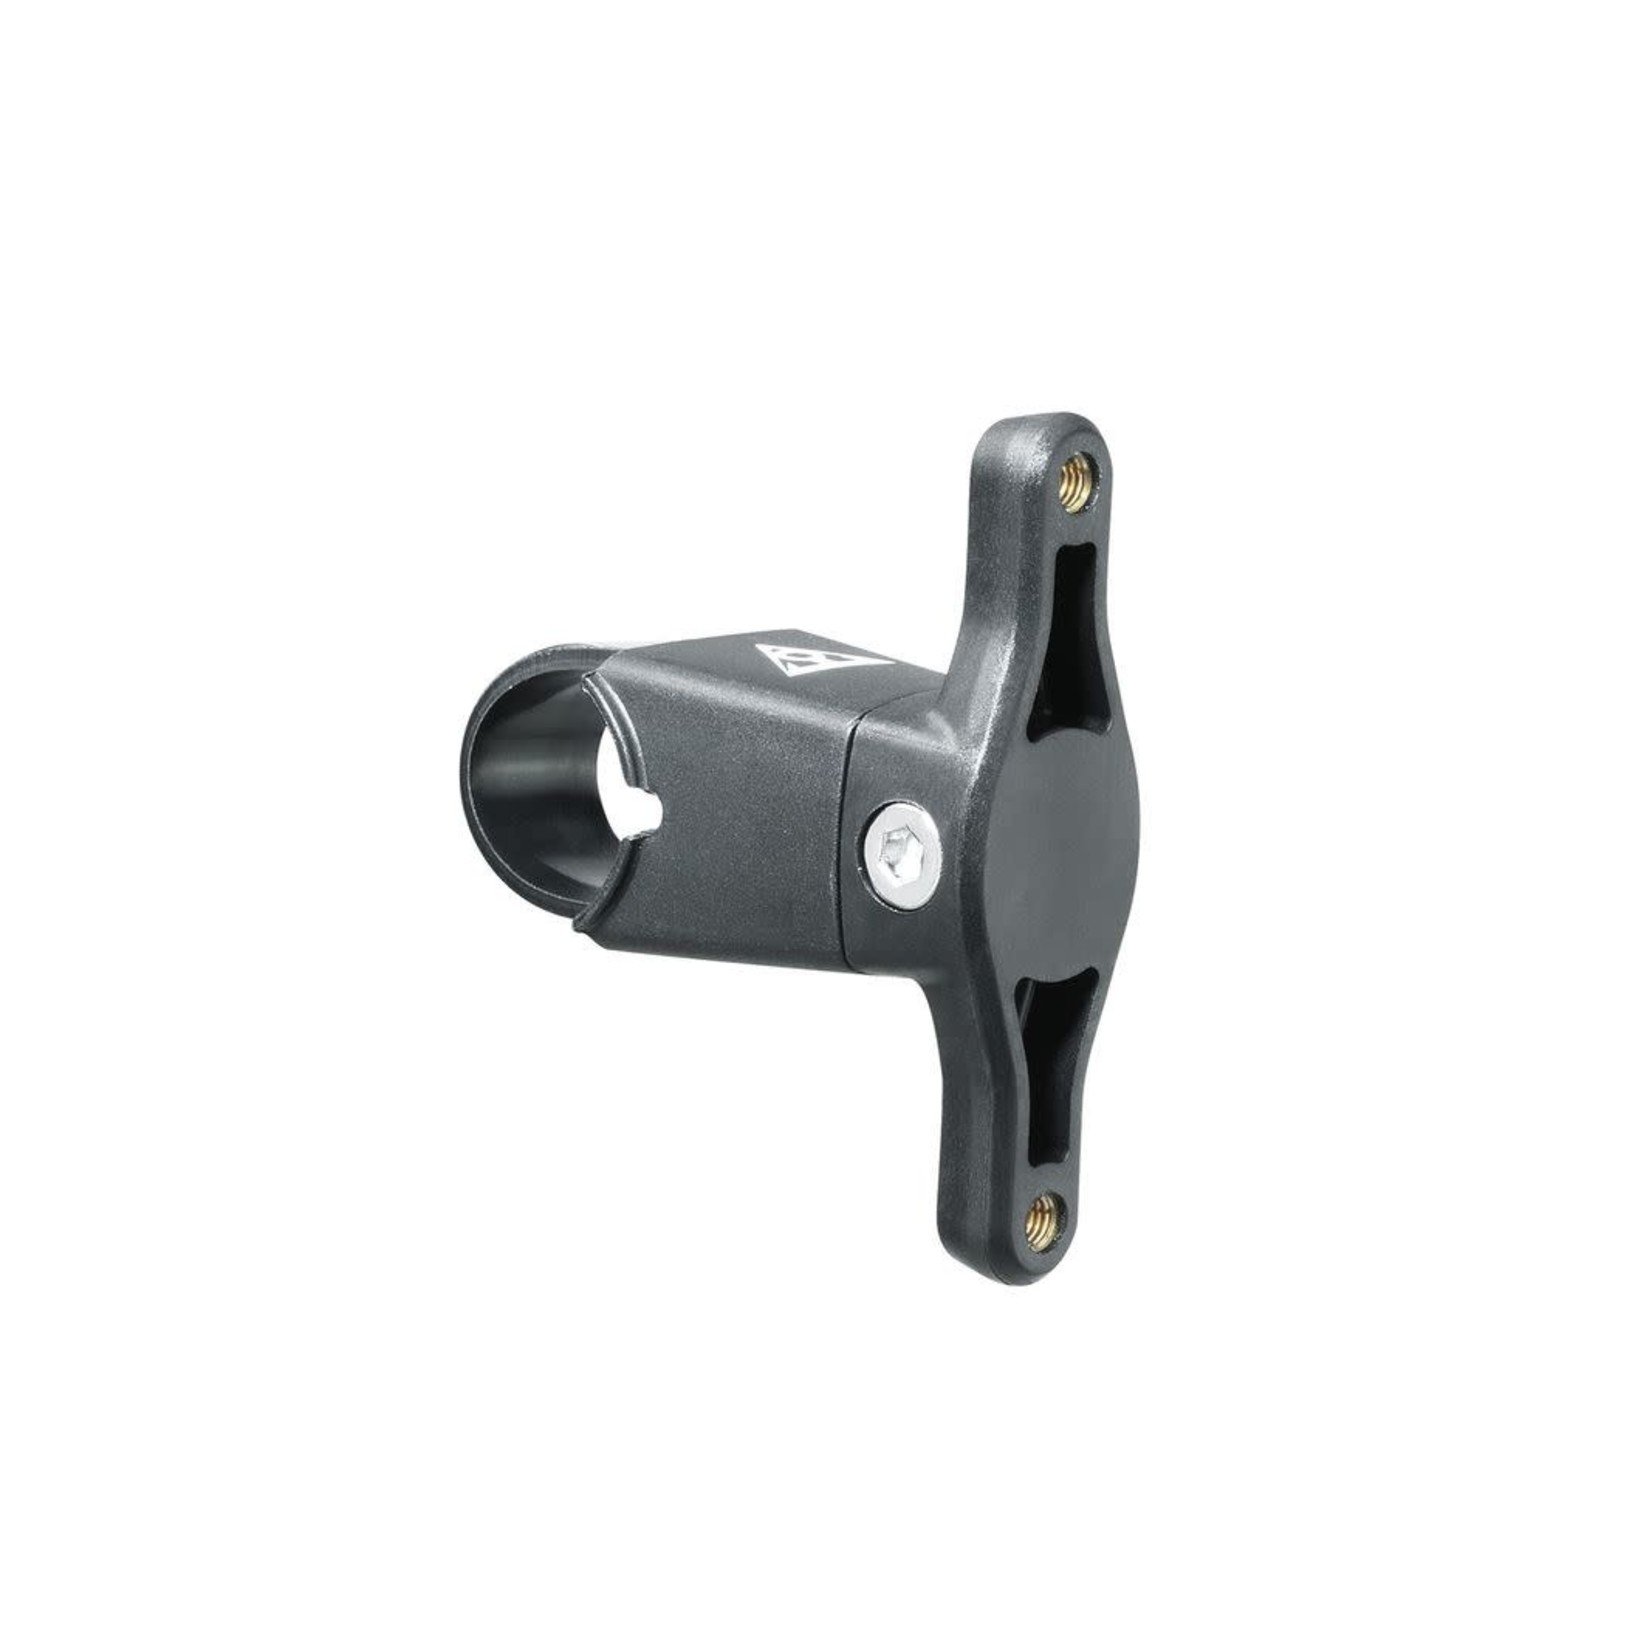 Topeak Cage Mount for seatpost or handlebar